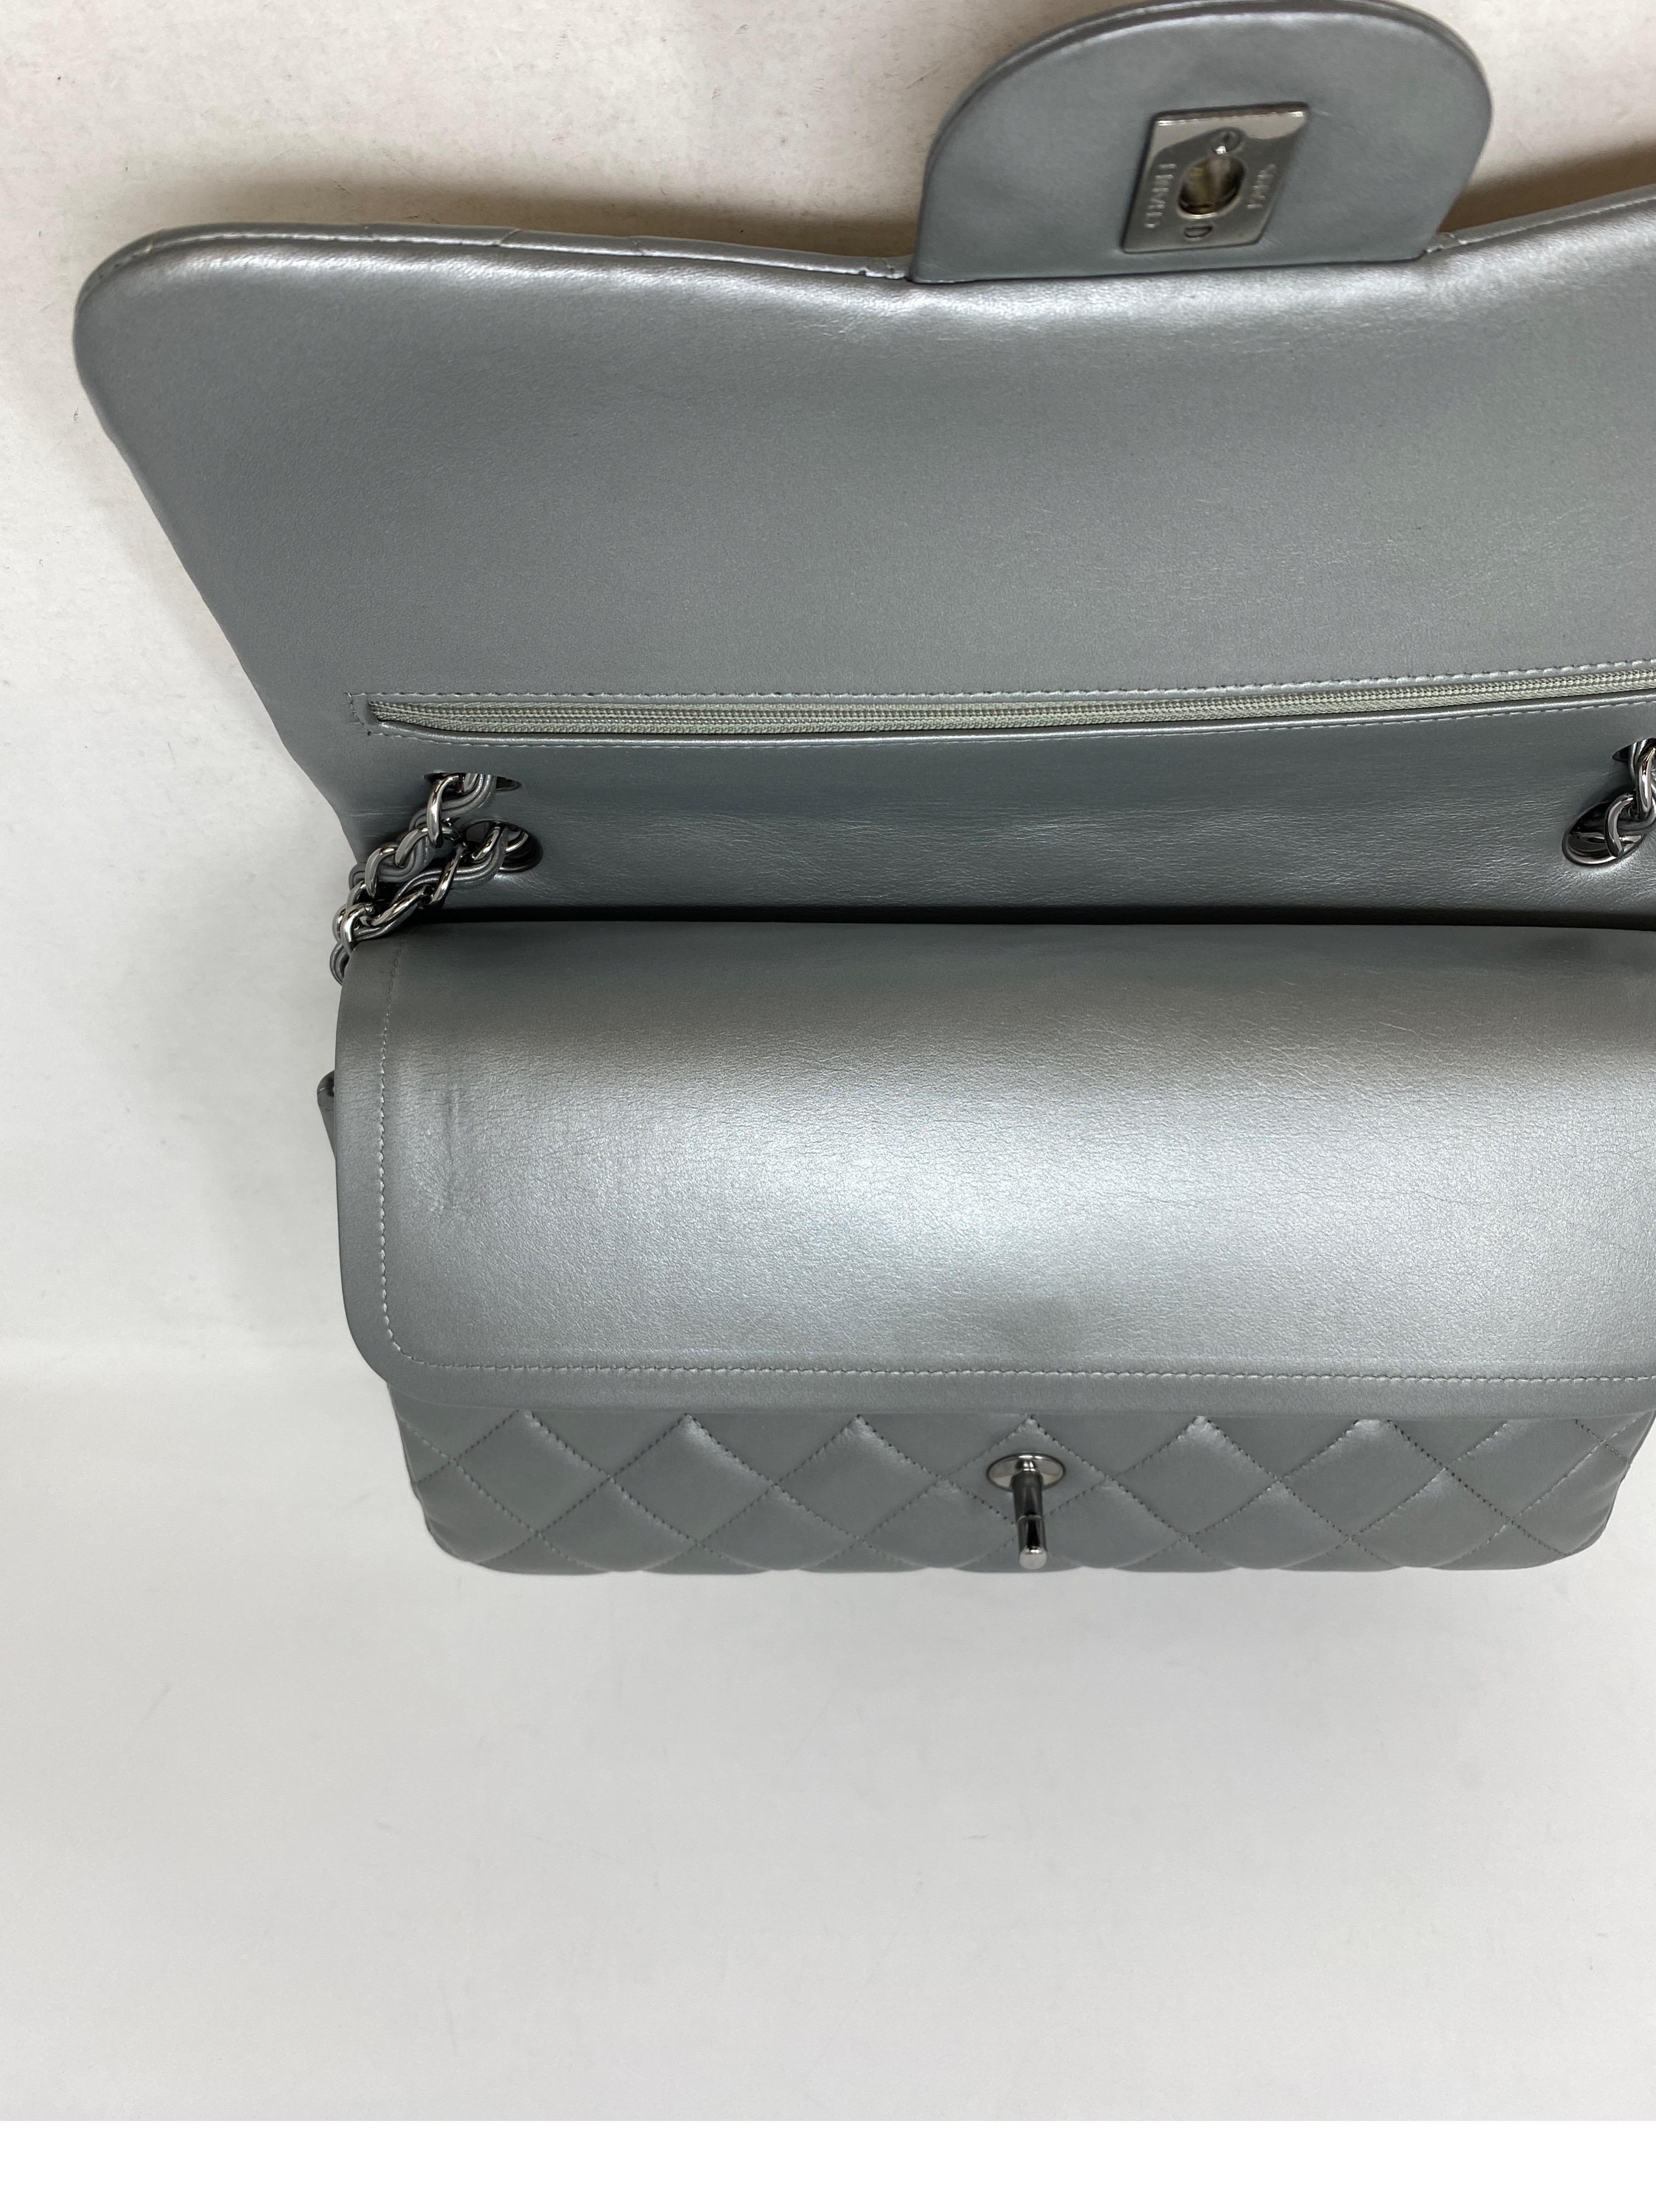 Chanel Silver Metallic Jumbo Bag  In Excellent Condition For Sale In Athens, GA